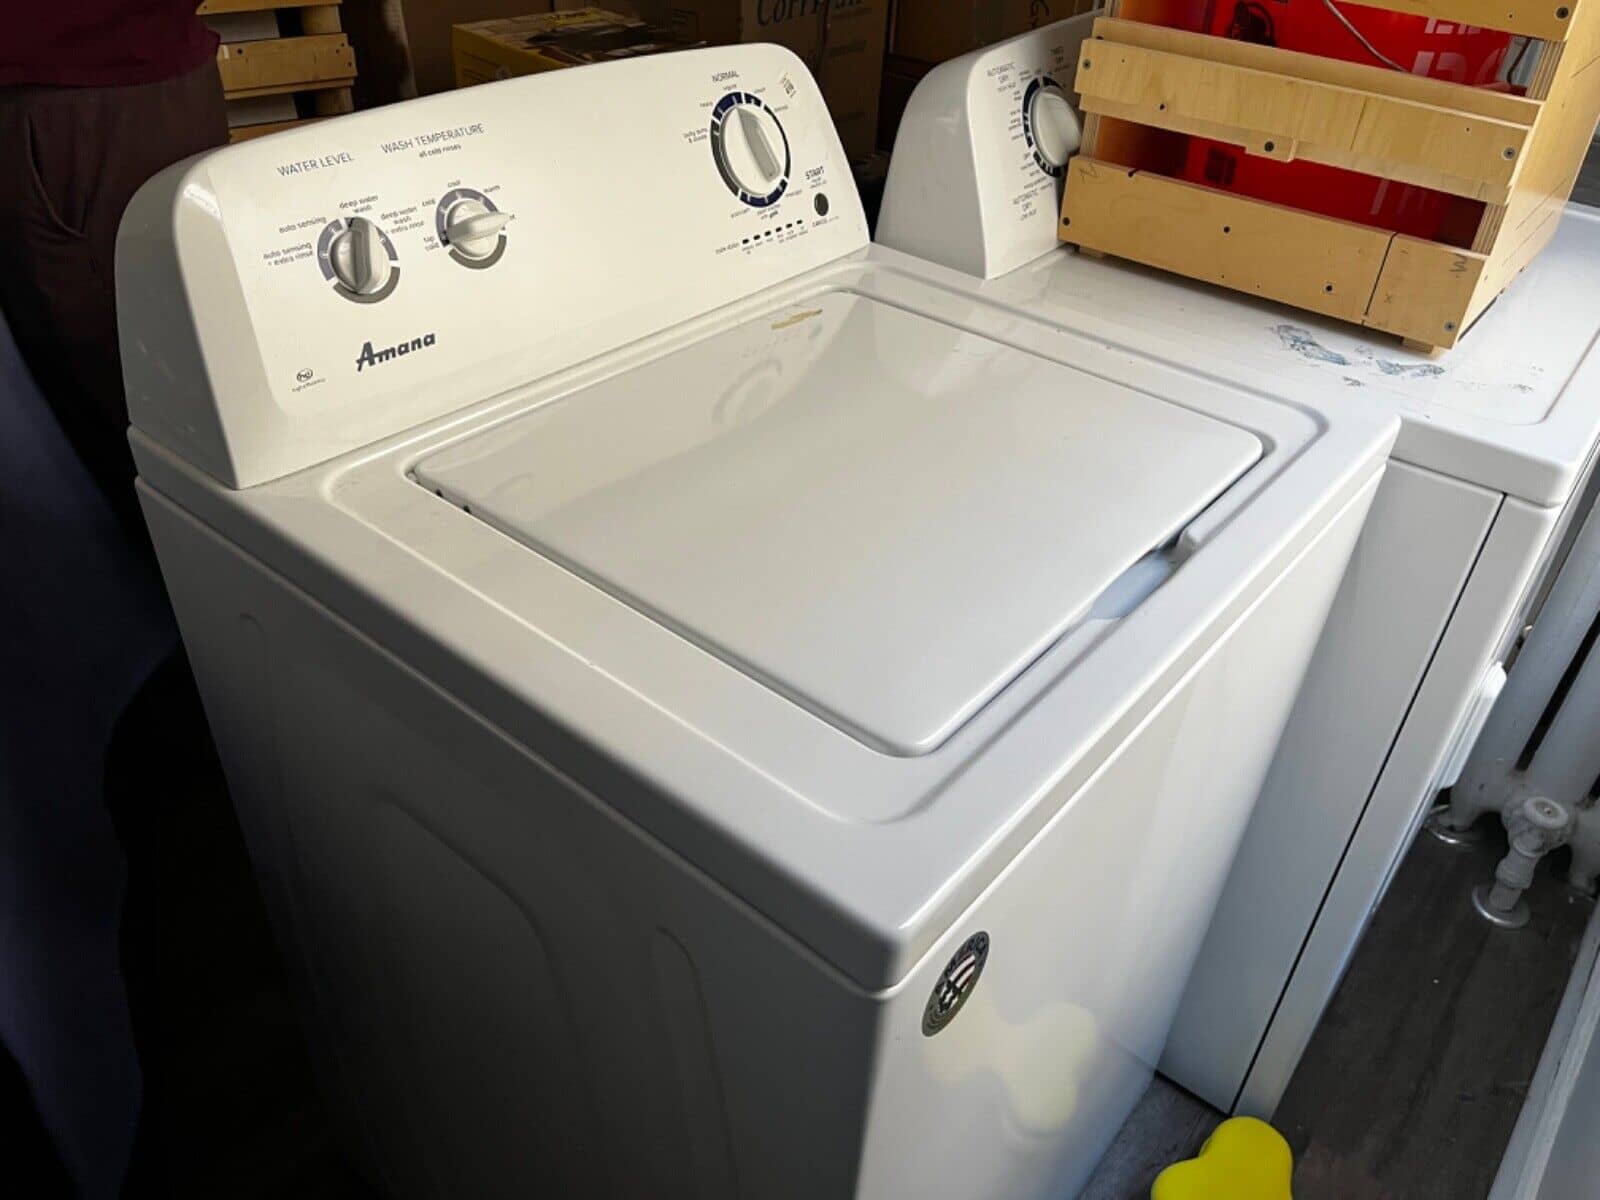 Amana Washer Not Spinning: 11 Easy Ways To Fix It Now